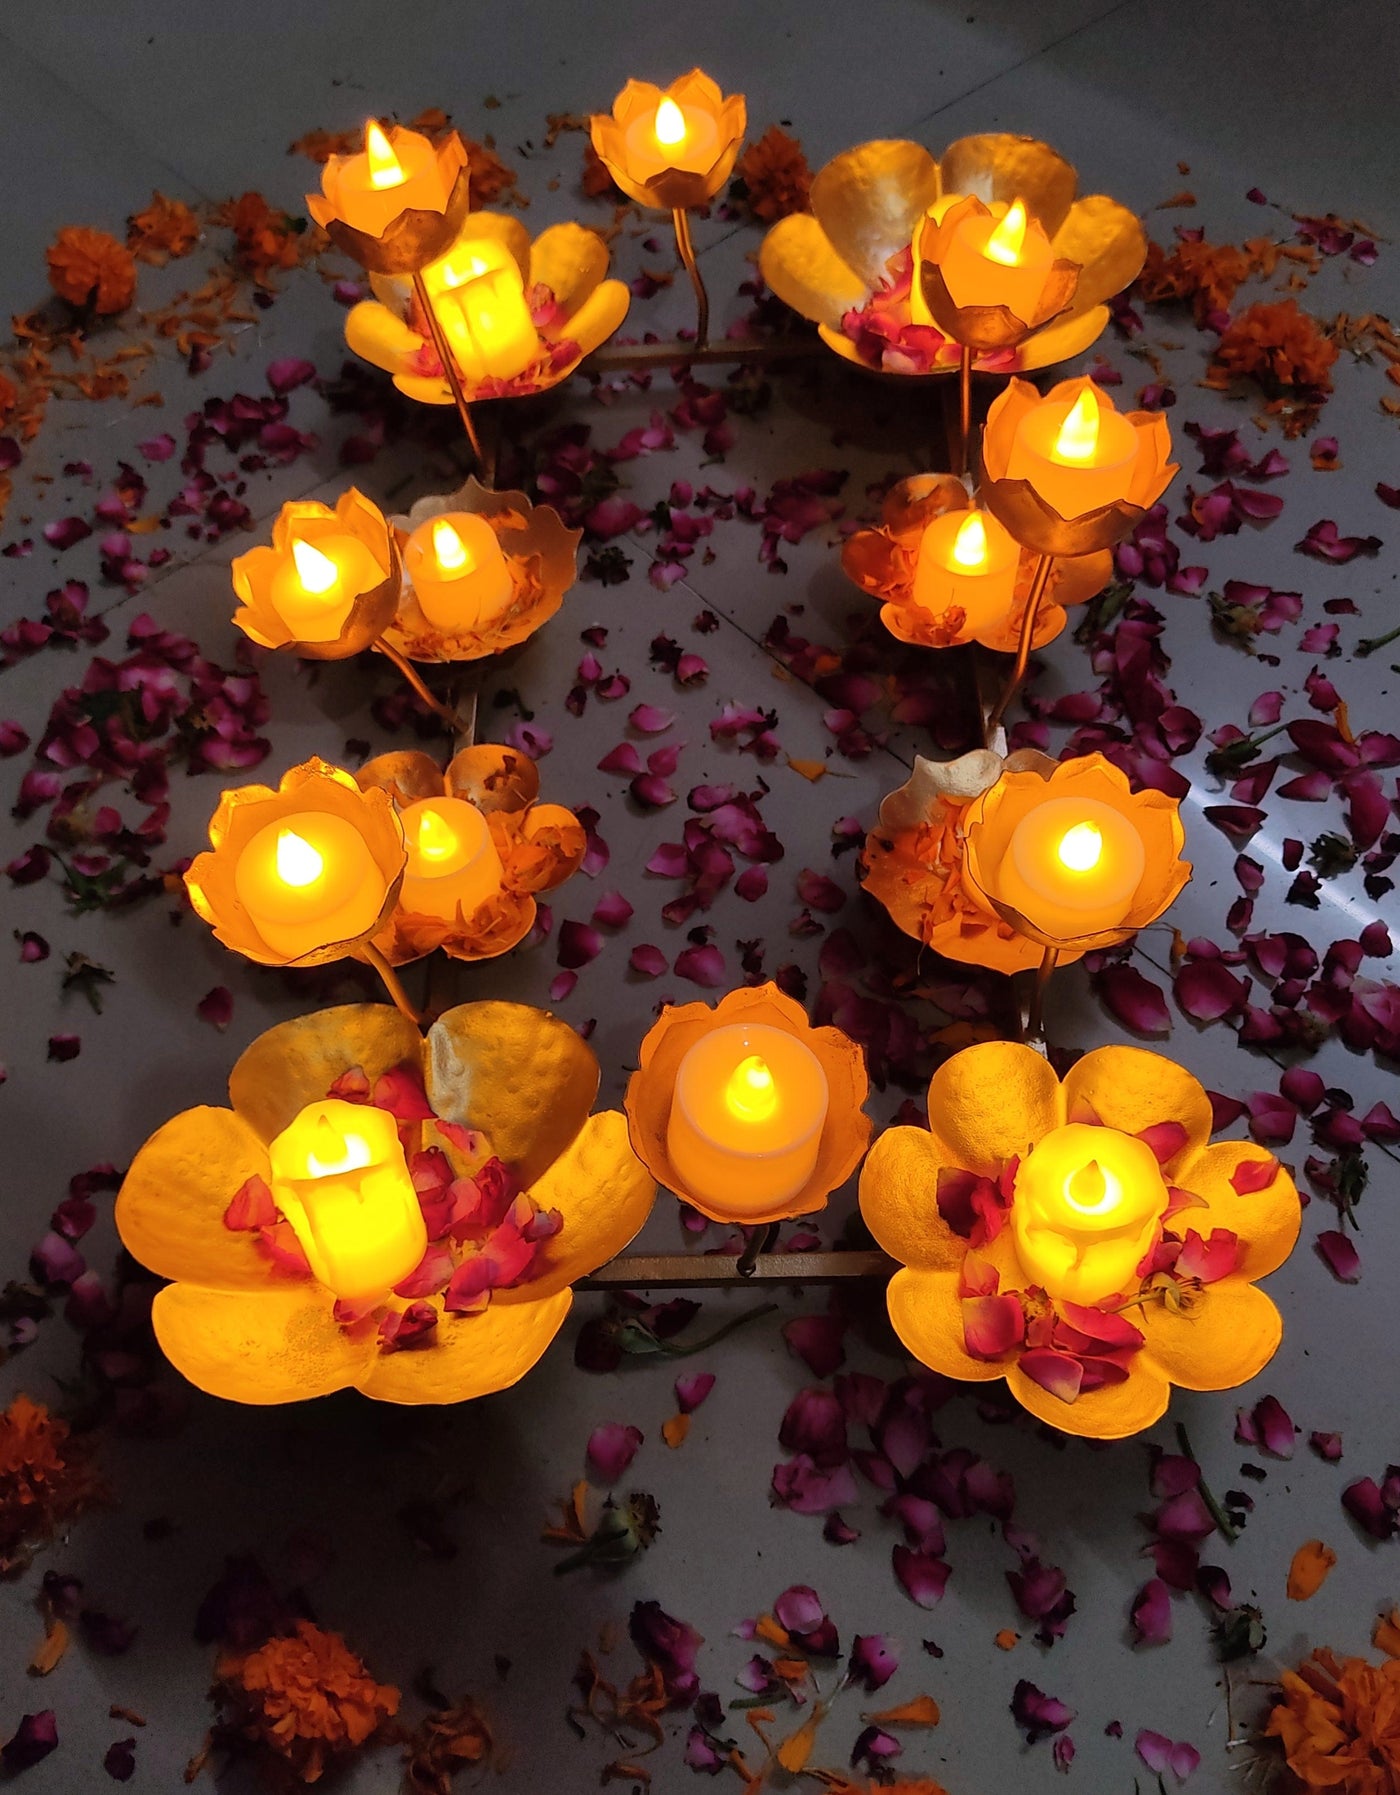 Lamansh Candle Holders LAMANSH® Decorative Metal Rangoli Diya Tealight Candle 🪔 holder stand /Diya stand ,Metal Handicraft for corporate & festival gifting 🎁 / Home decor product for Diwali ( candles not included )